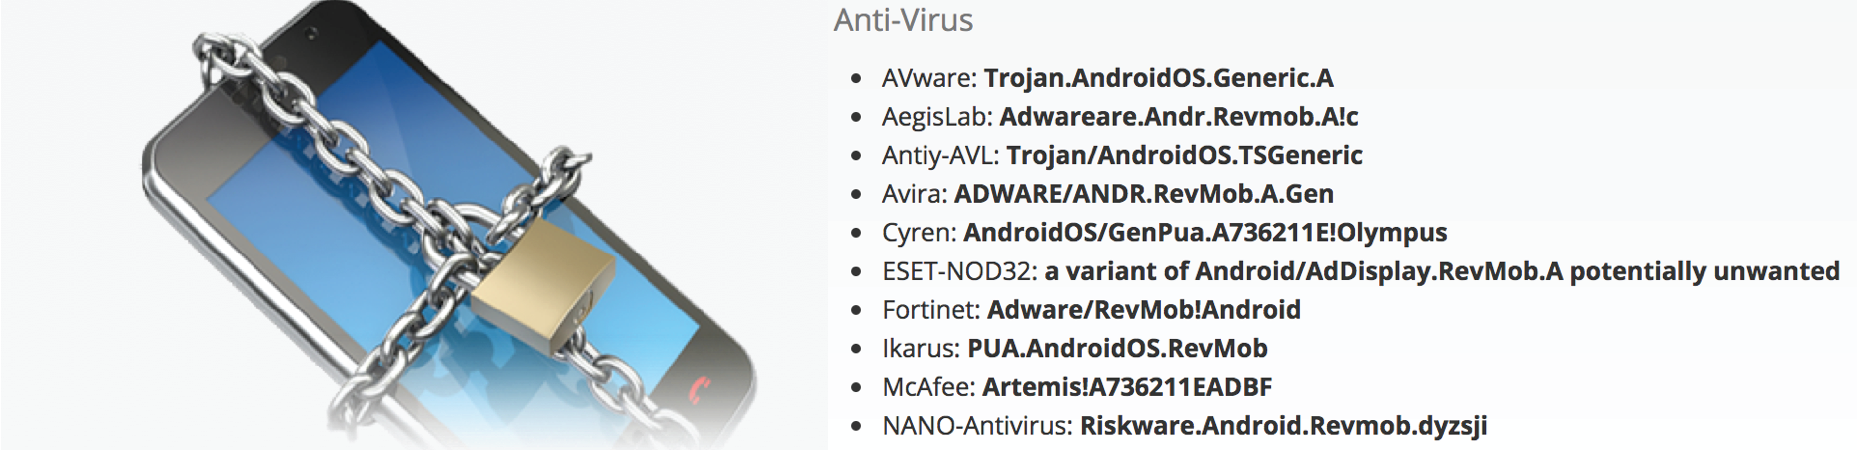 Antivirus mobile apps are leveraging the threat of malware infections to drive downloads of potentially unwanted programs, useless mobile apps, and malware.